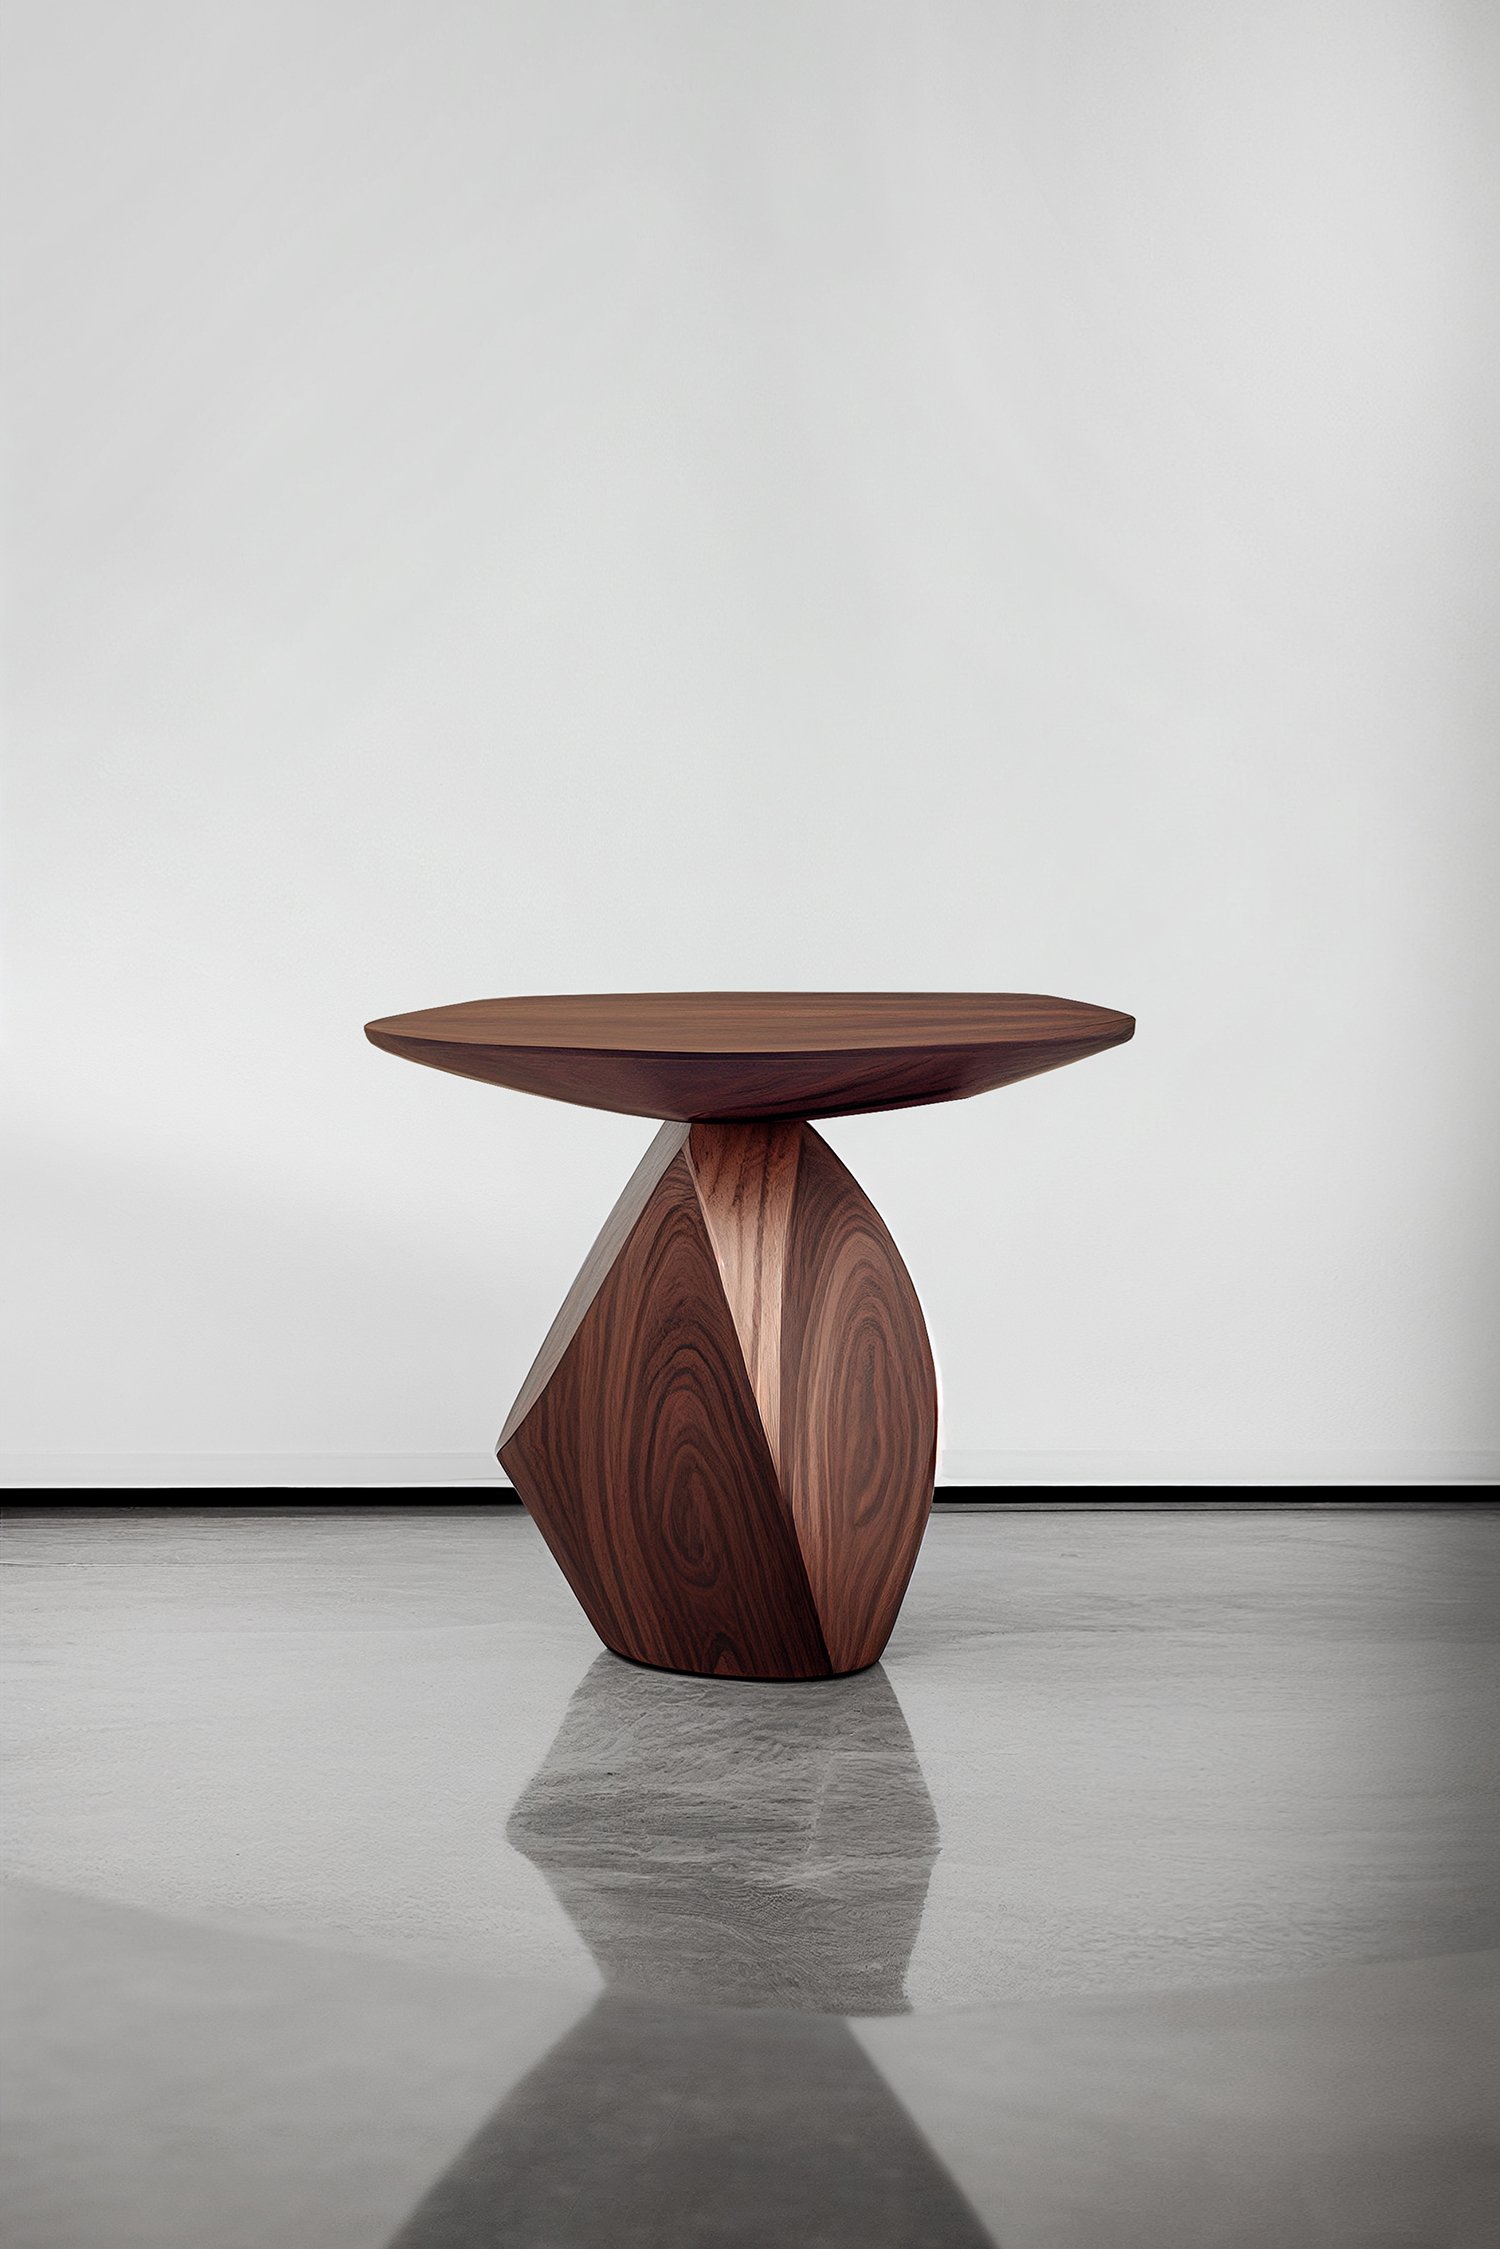 Sculptural Side Table Made of Solid Walnut Wood Solace S3 by Joel Escalona — 2.jpg